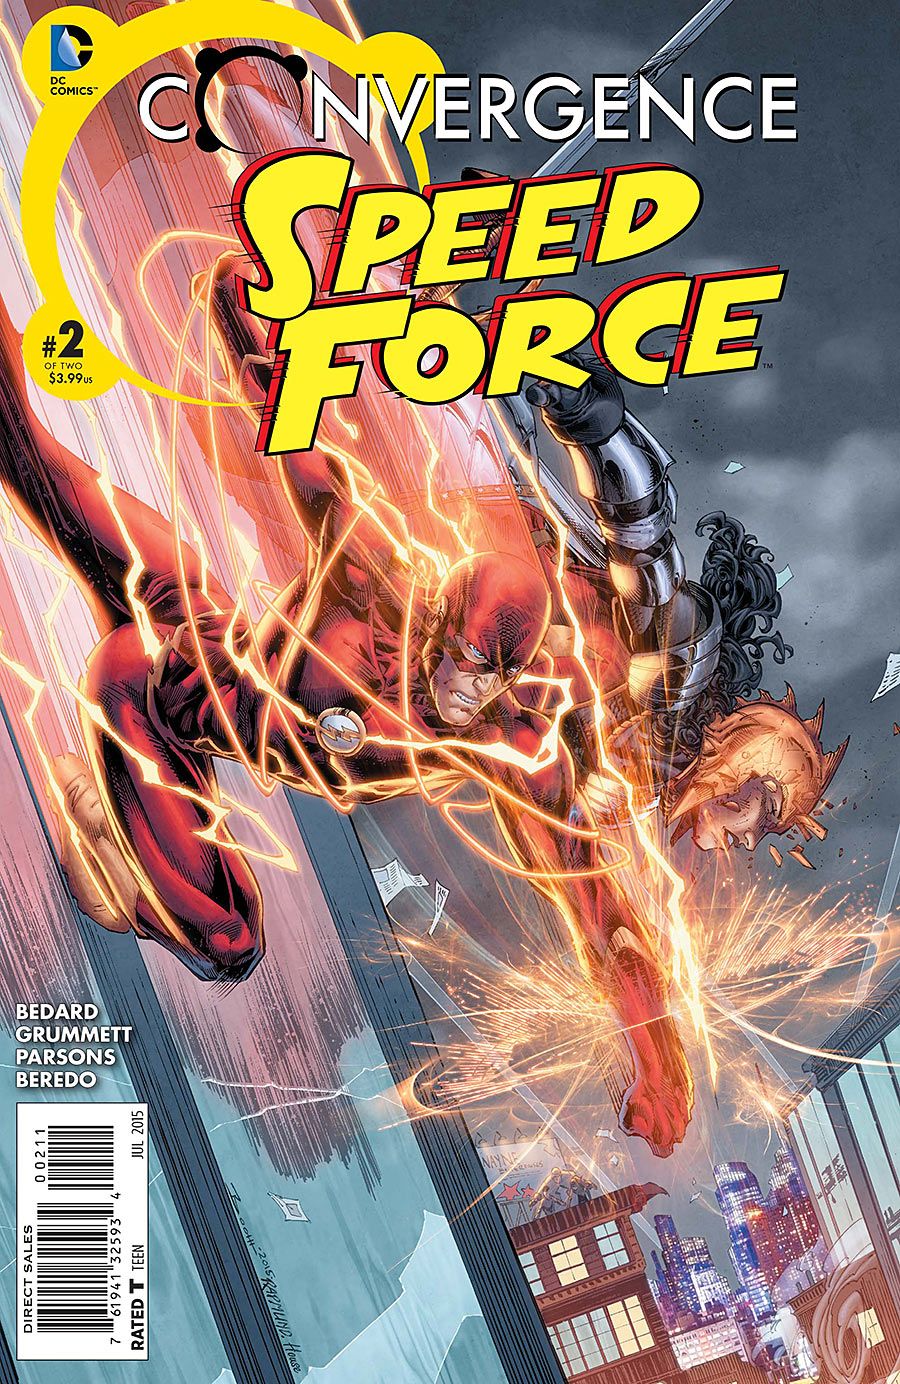 Convergence Speed Force 2